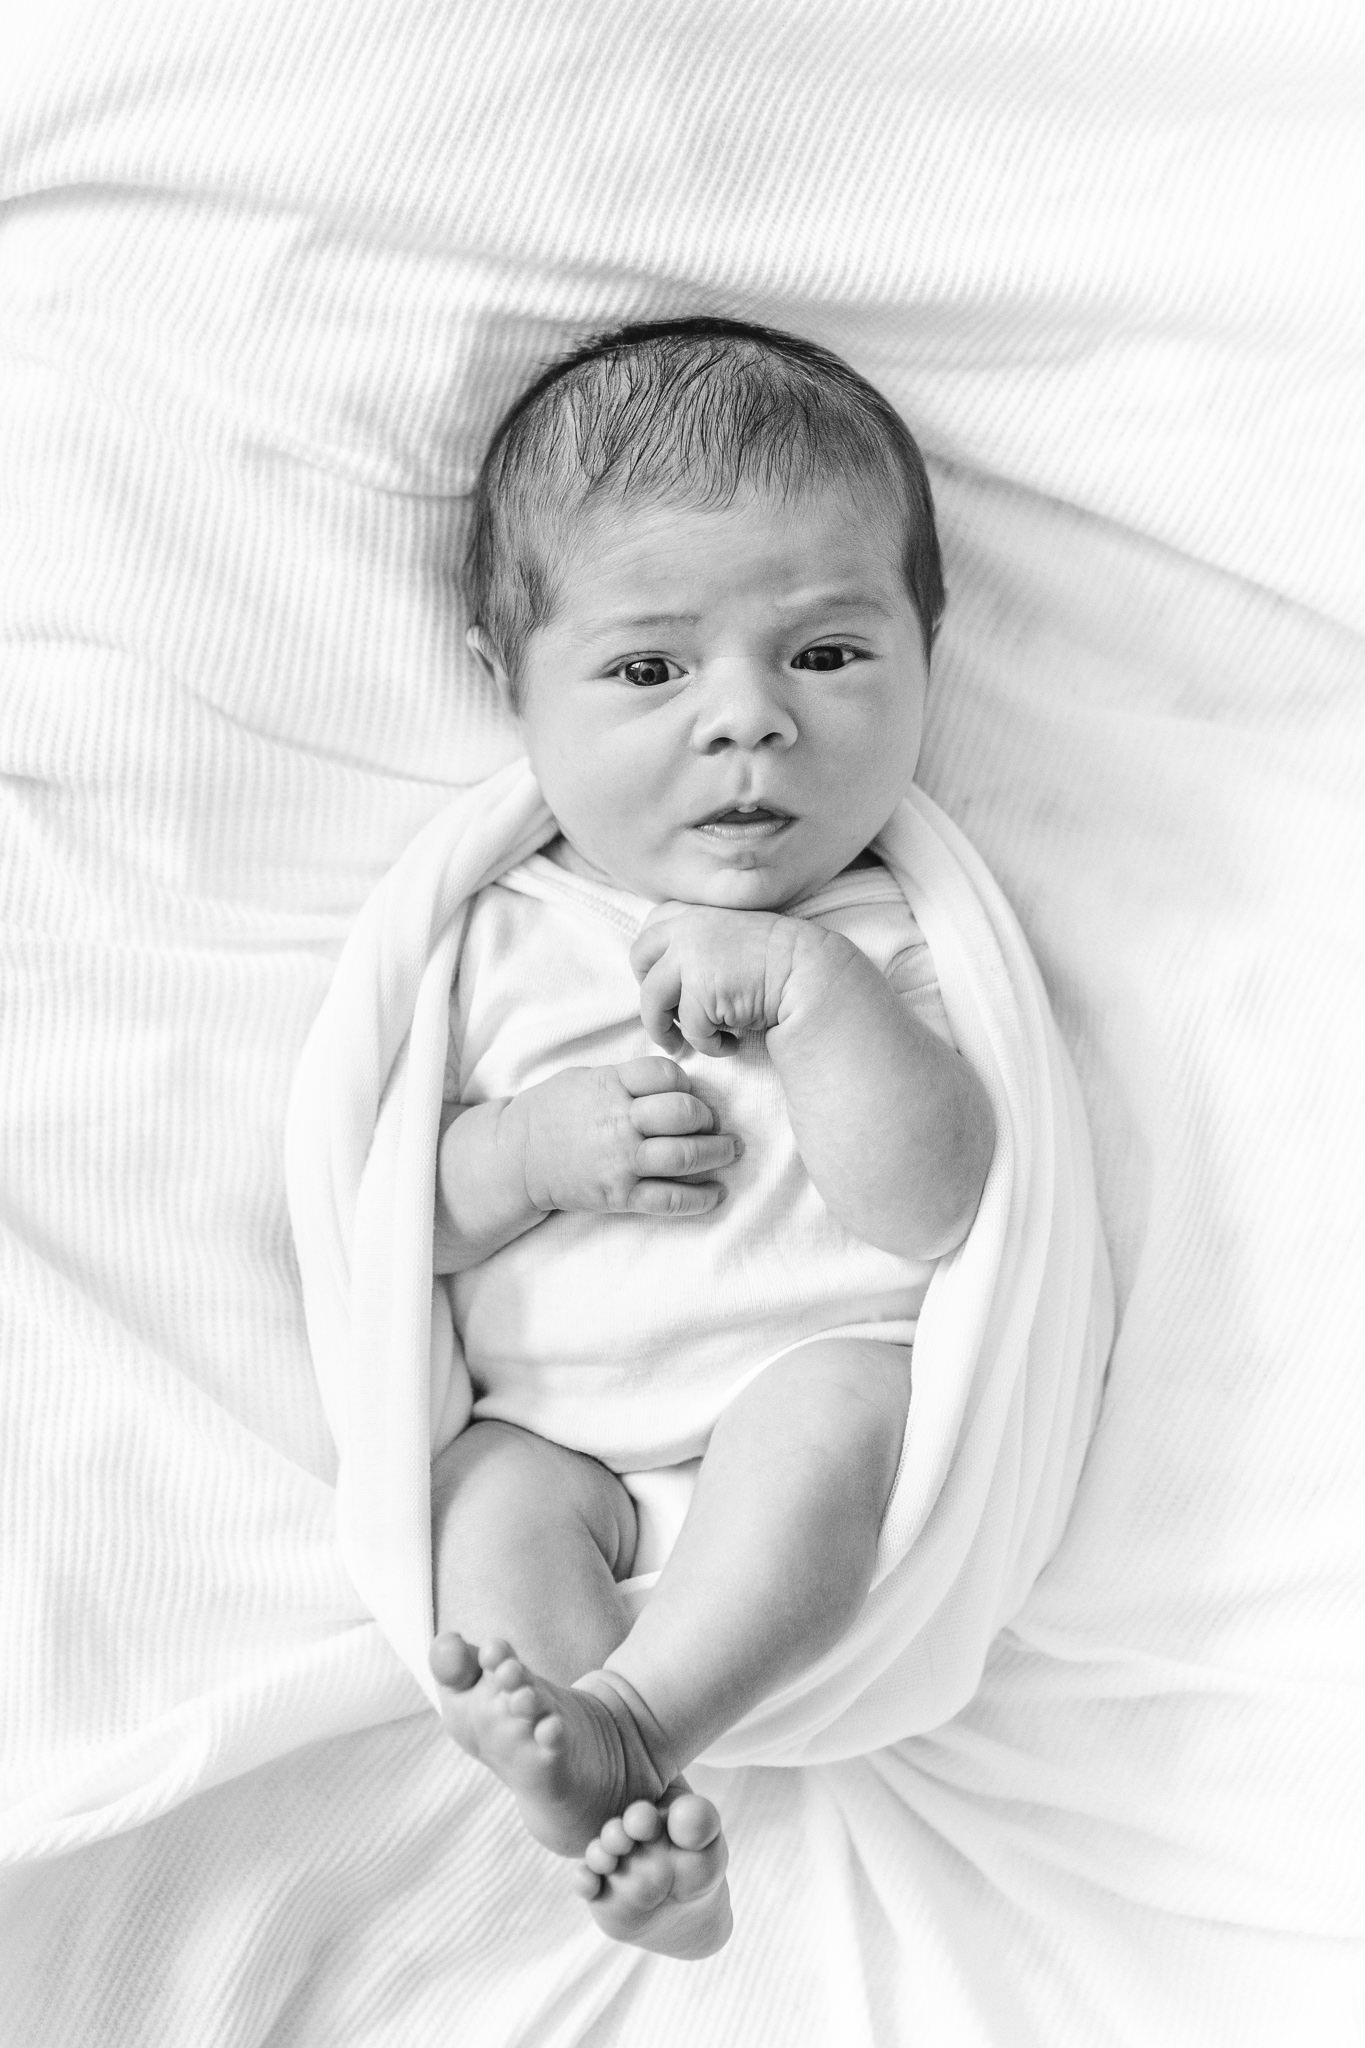  Nicole Hawkins Photography captures a black and white portrait of a swaddled newborn on a bed. swaddle black and white portraits of newborns #NicoleHawkinsPhotography #NicoleHawkinsNewborns #Babygirl #inhomenewbornsNJ #homenewbonportraits #inhomenew